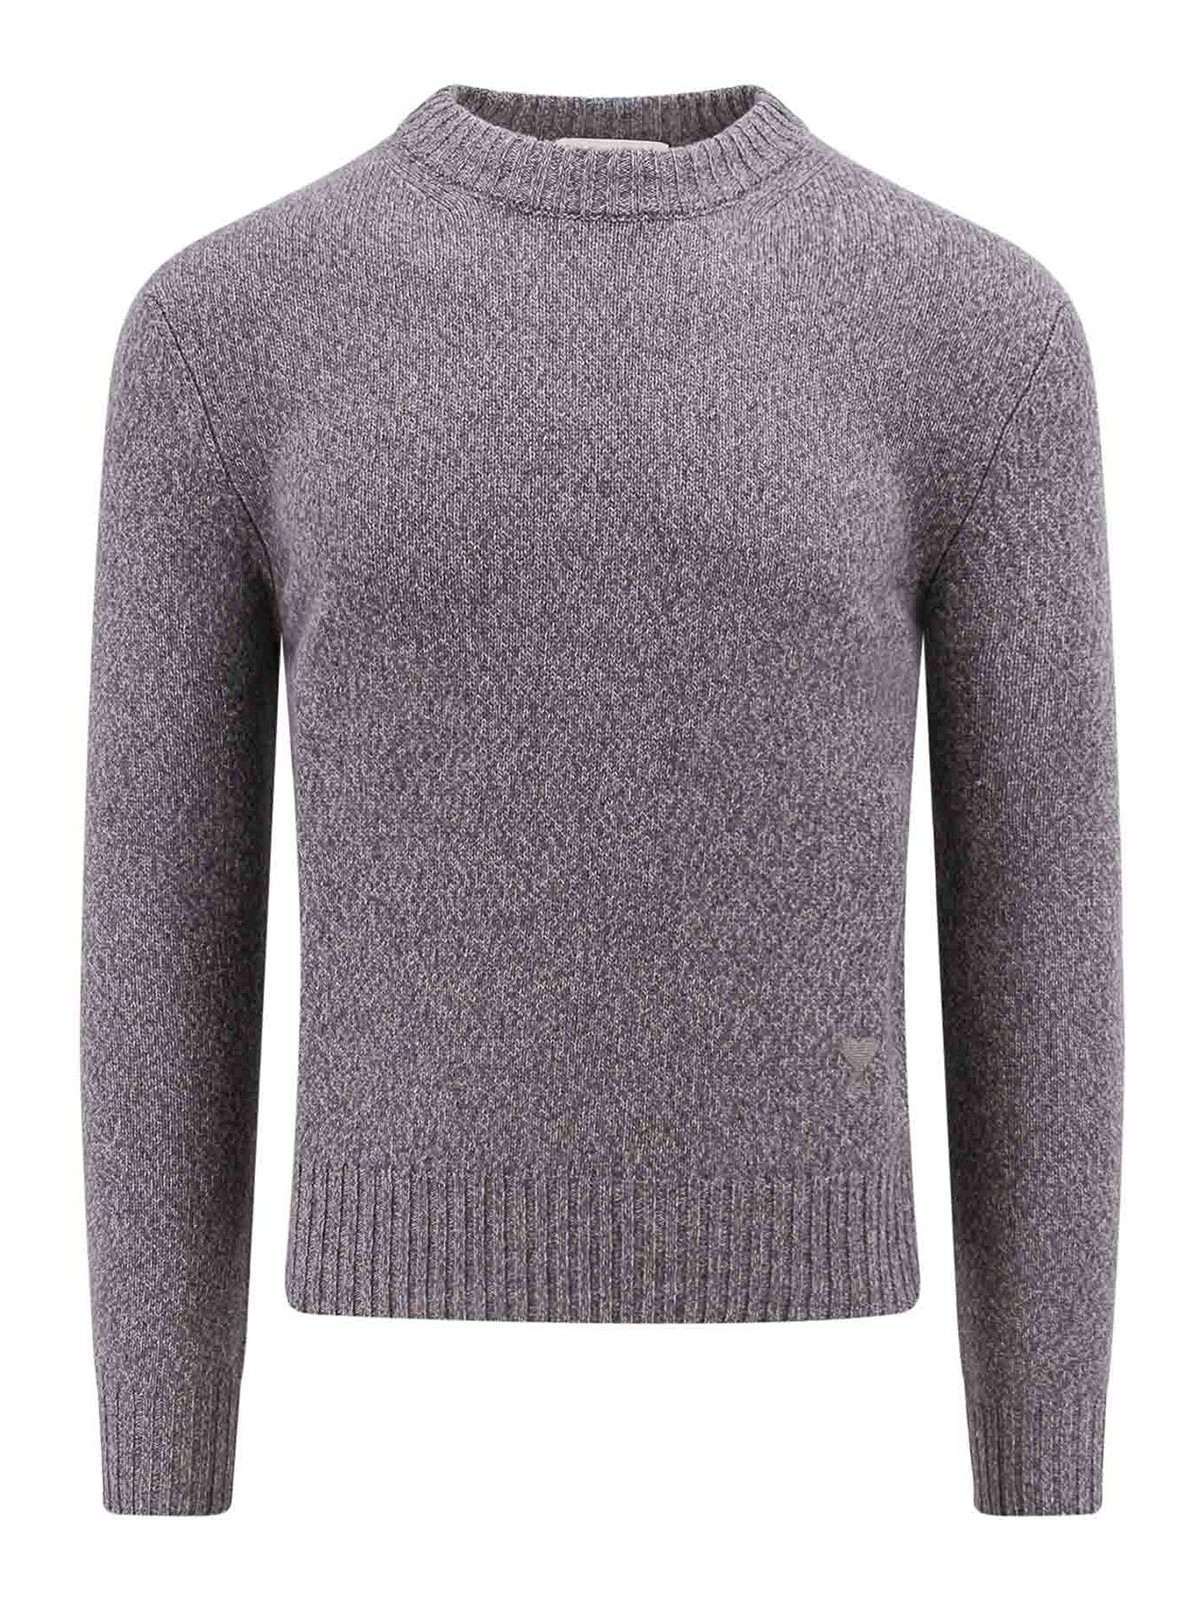 Ami Alexandre Mattiussi Recycled And Recyclable Material Sweater In Gris